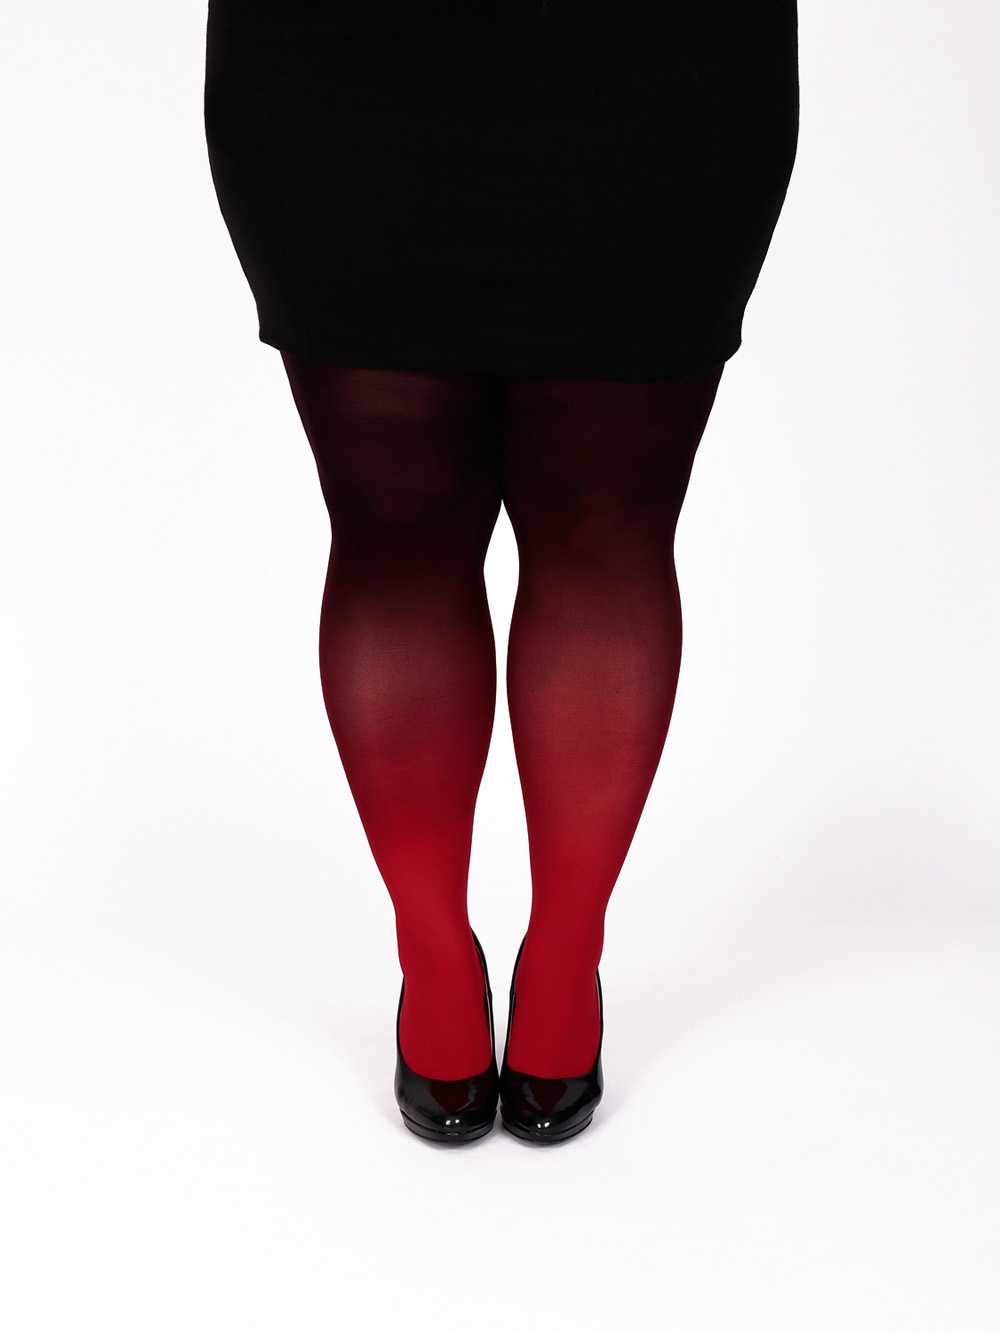 Plus Size Red Black Tights Virivee Tights Unique Tights Designed And Made In Europe